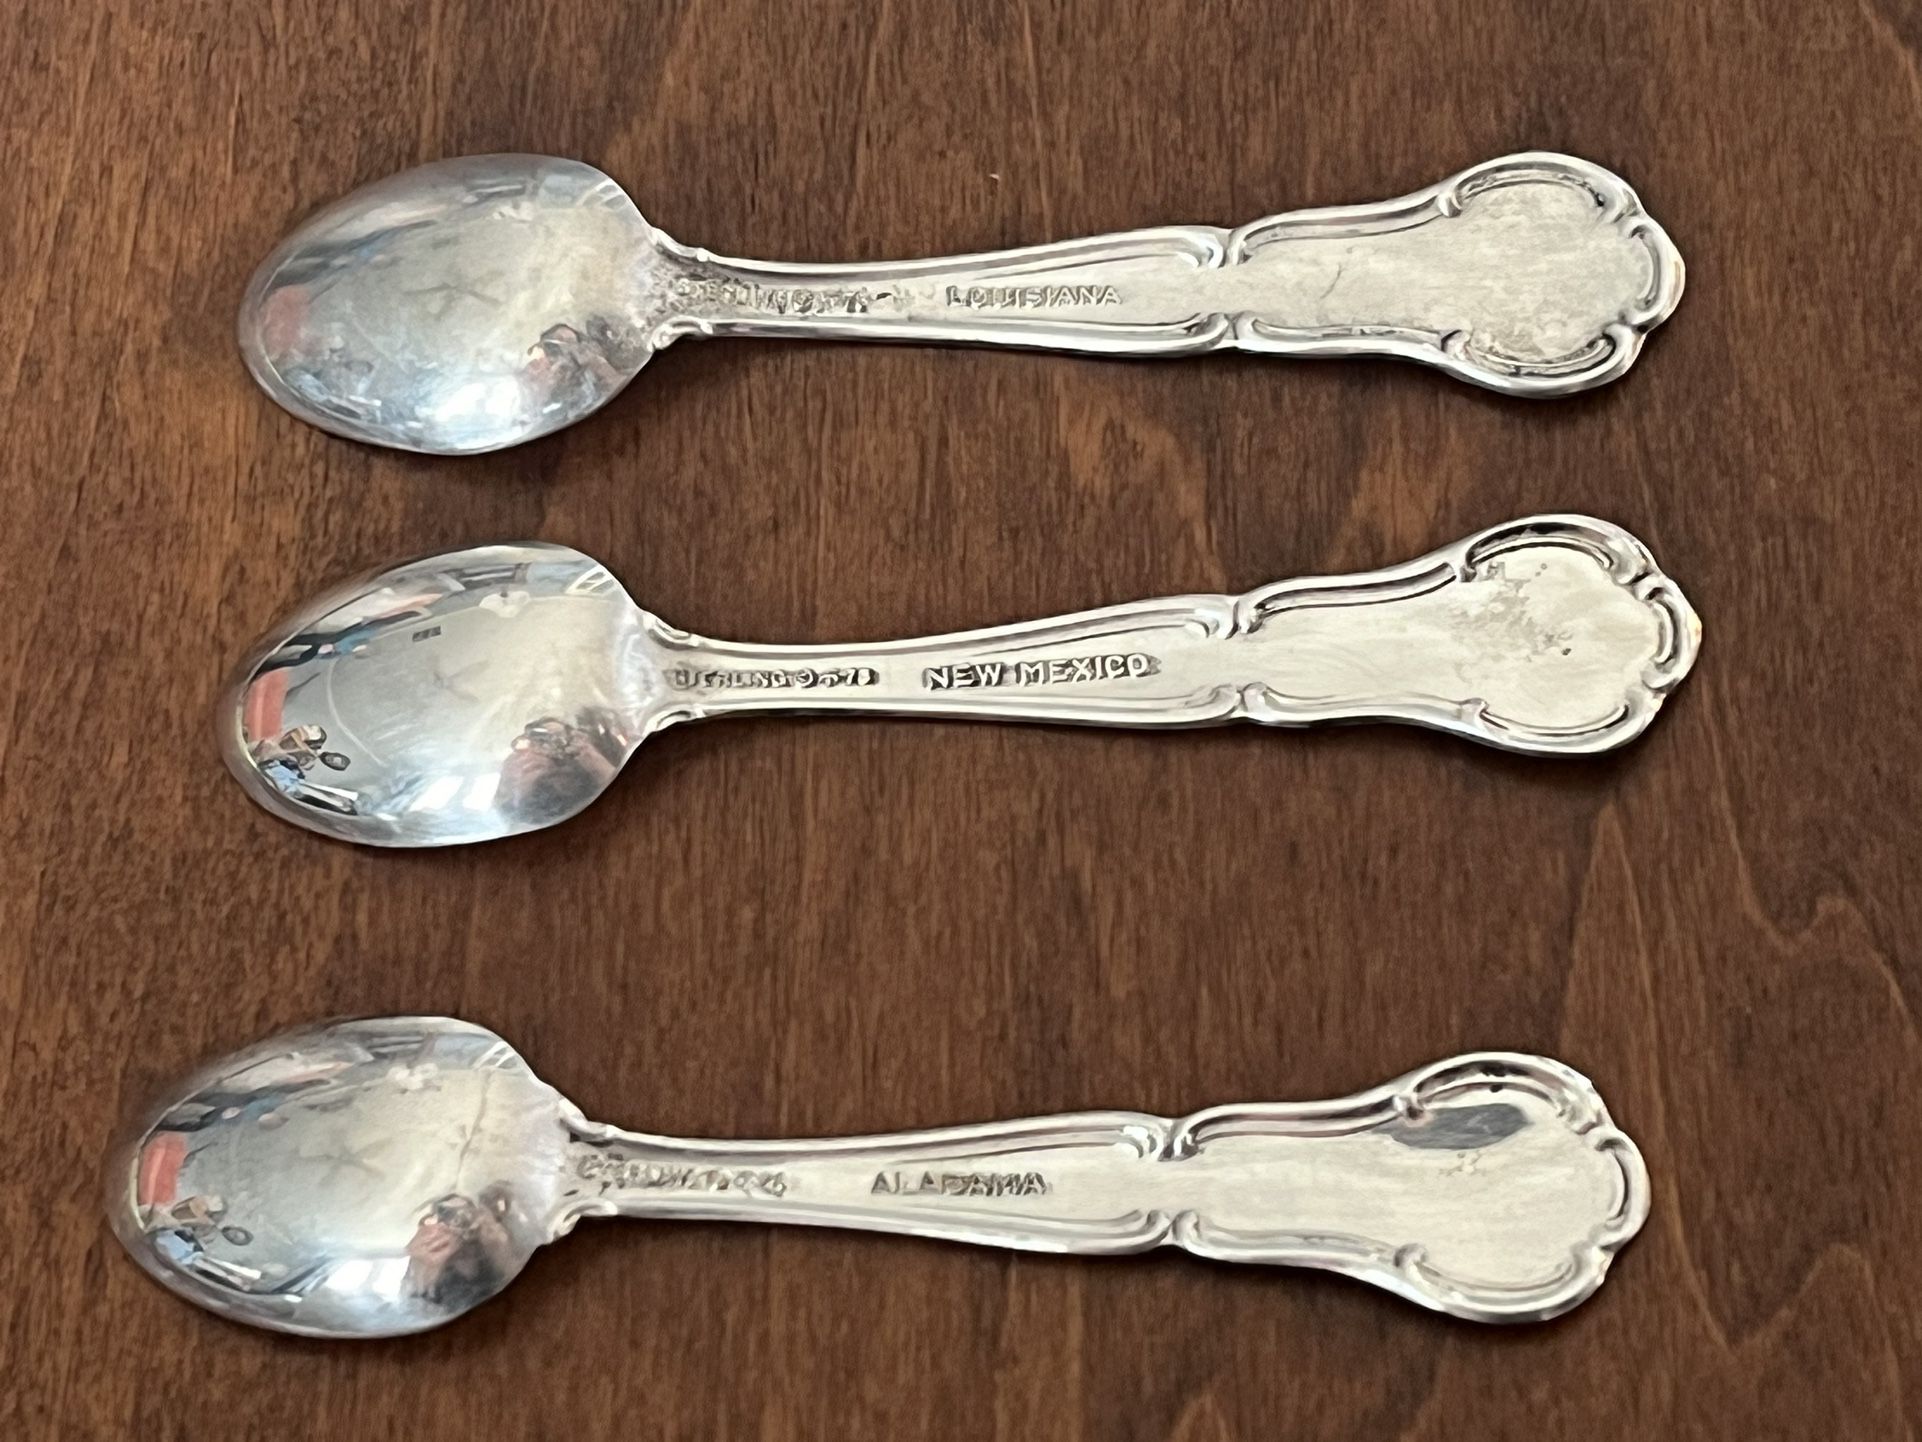 Franklin mint official State Flower Collectible Spoons